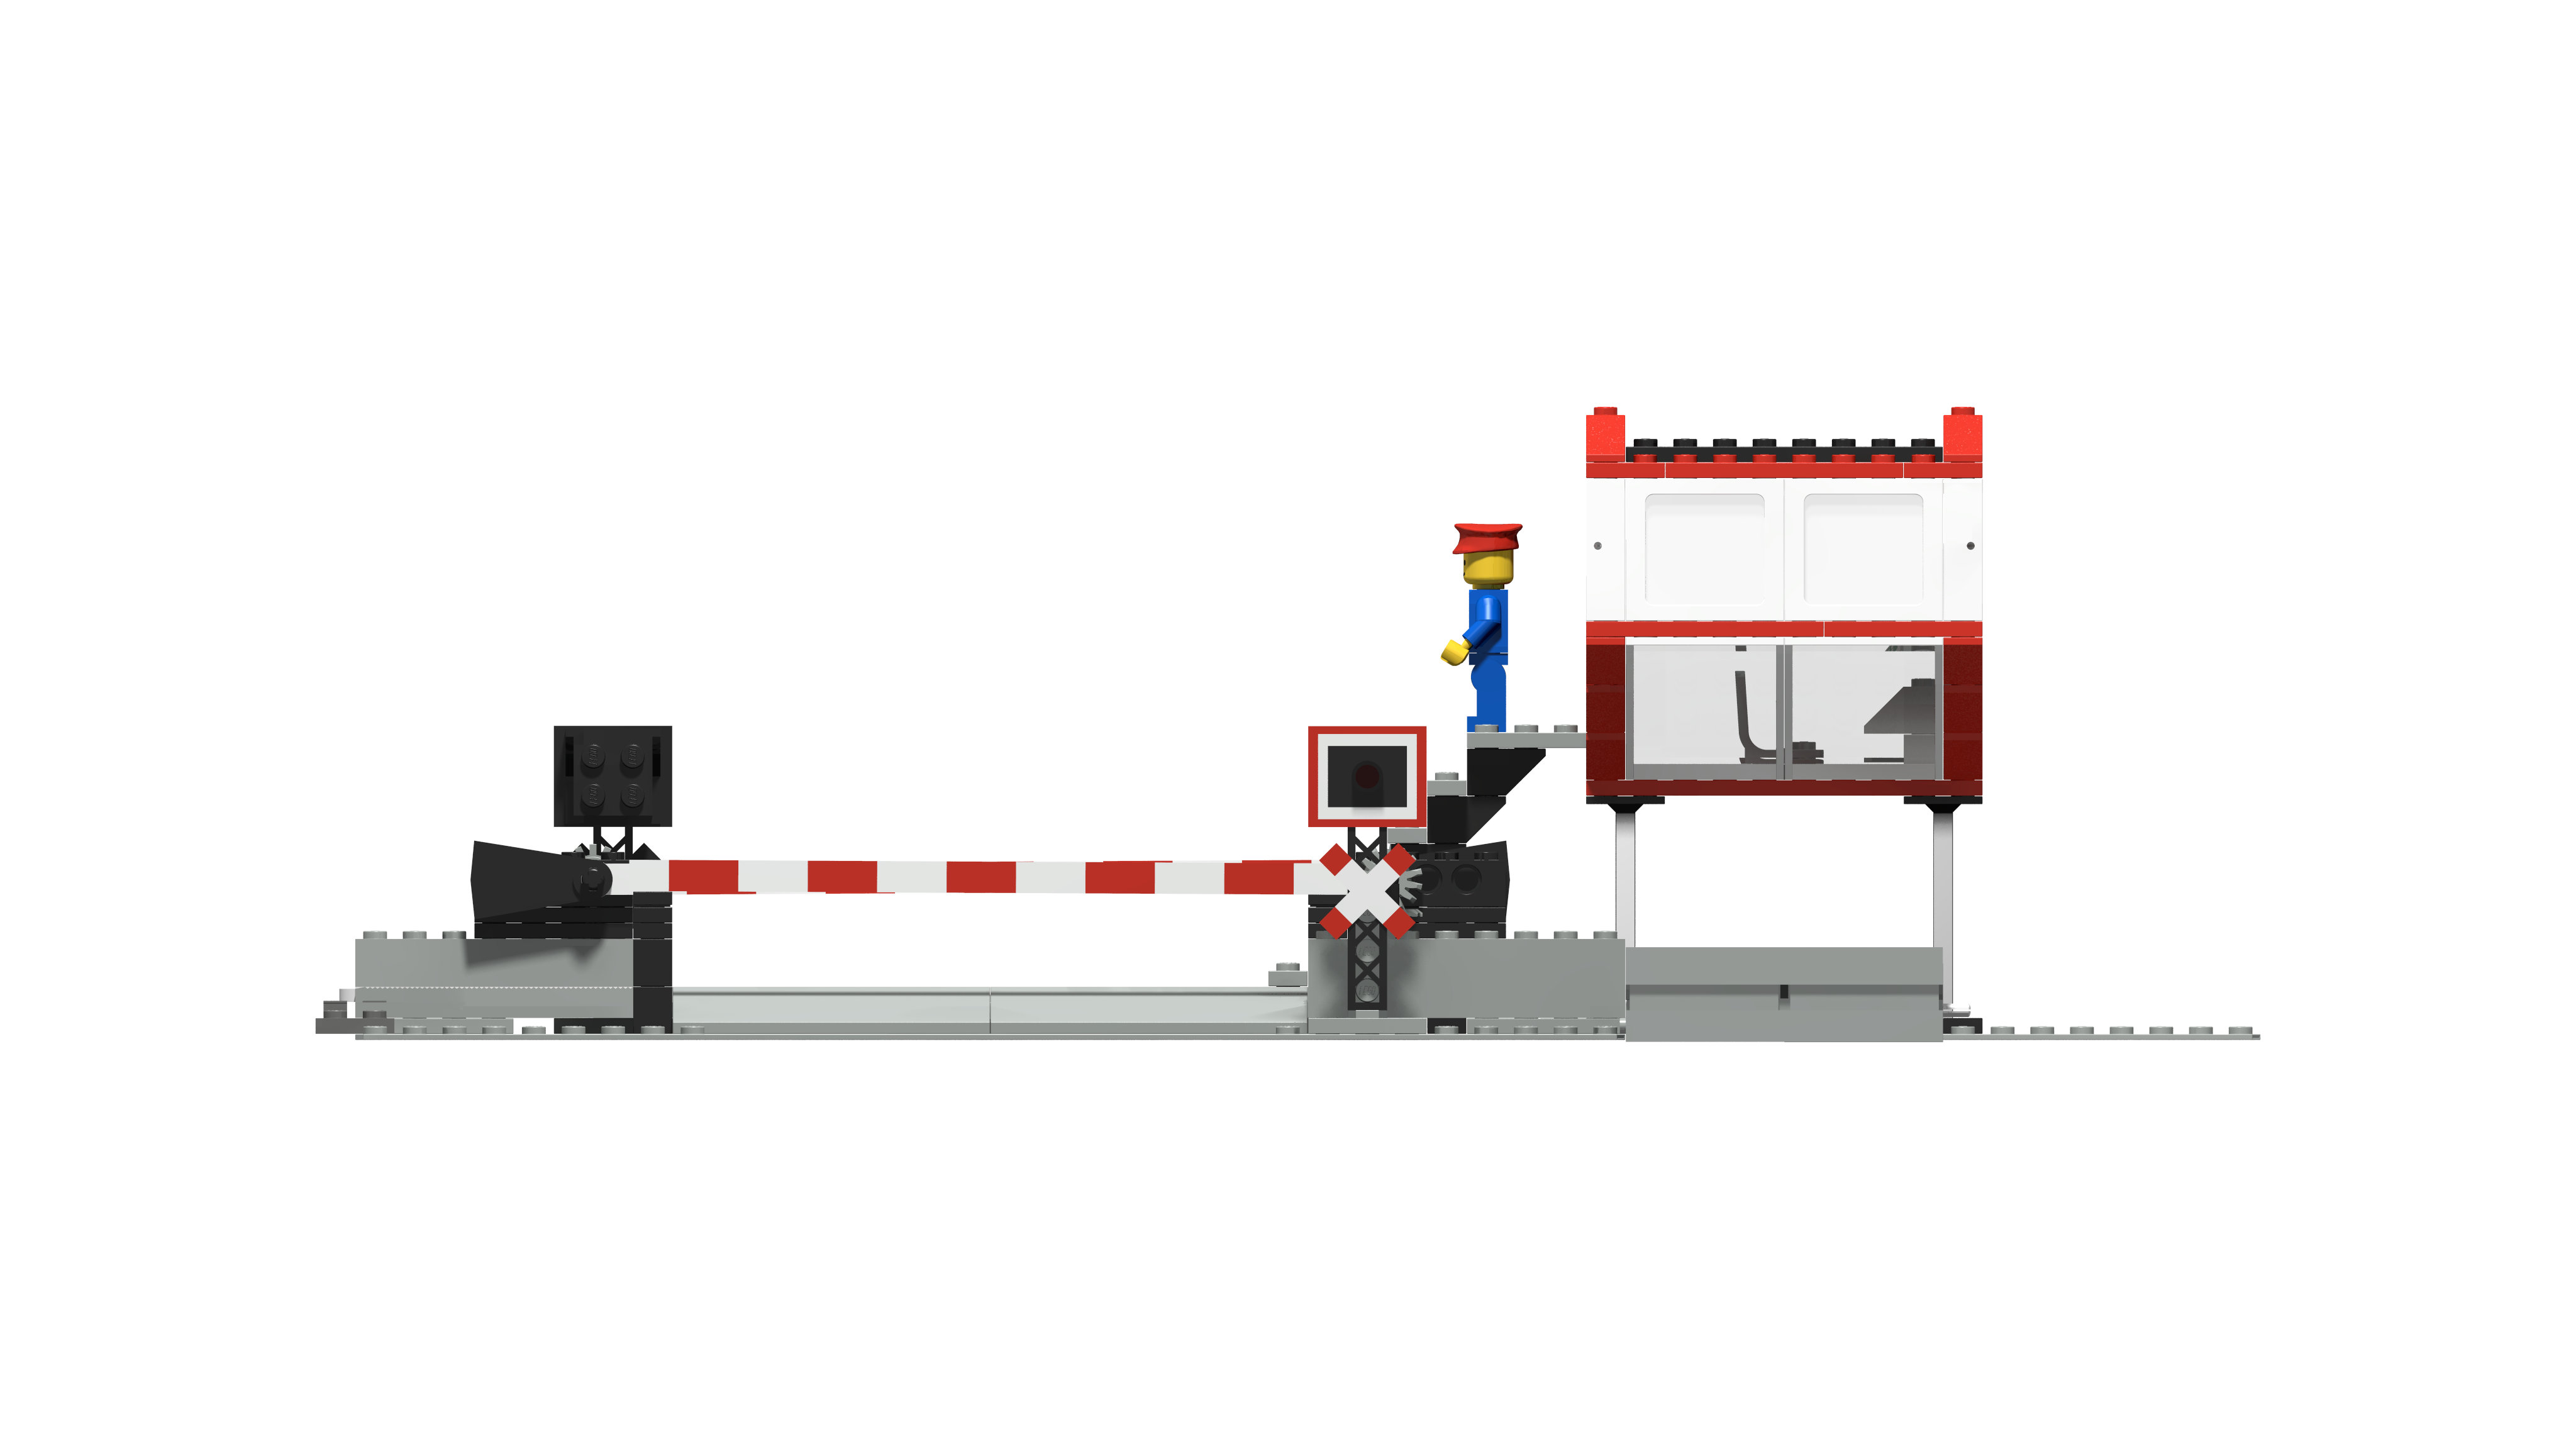 7866_level_crossing_with_electric_gates_2.jpg